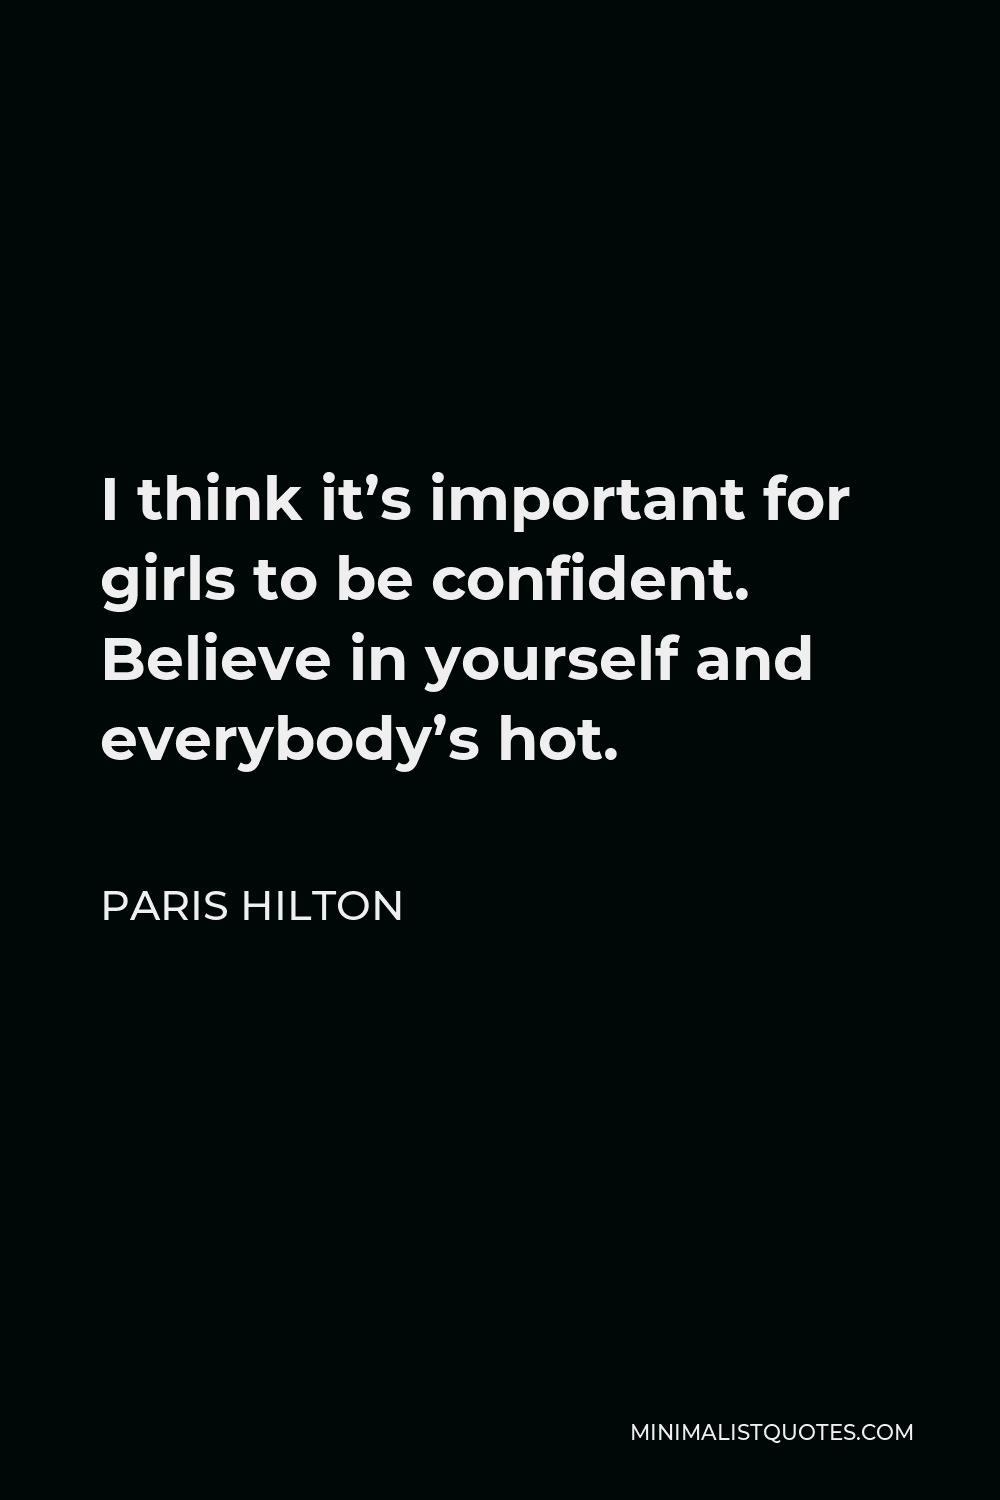 Paris Hilton Quote - I think it’s important for girls to be confident. Believe in yourself and everybody’s hot.